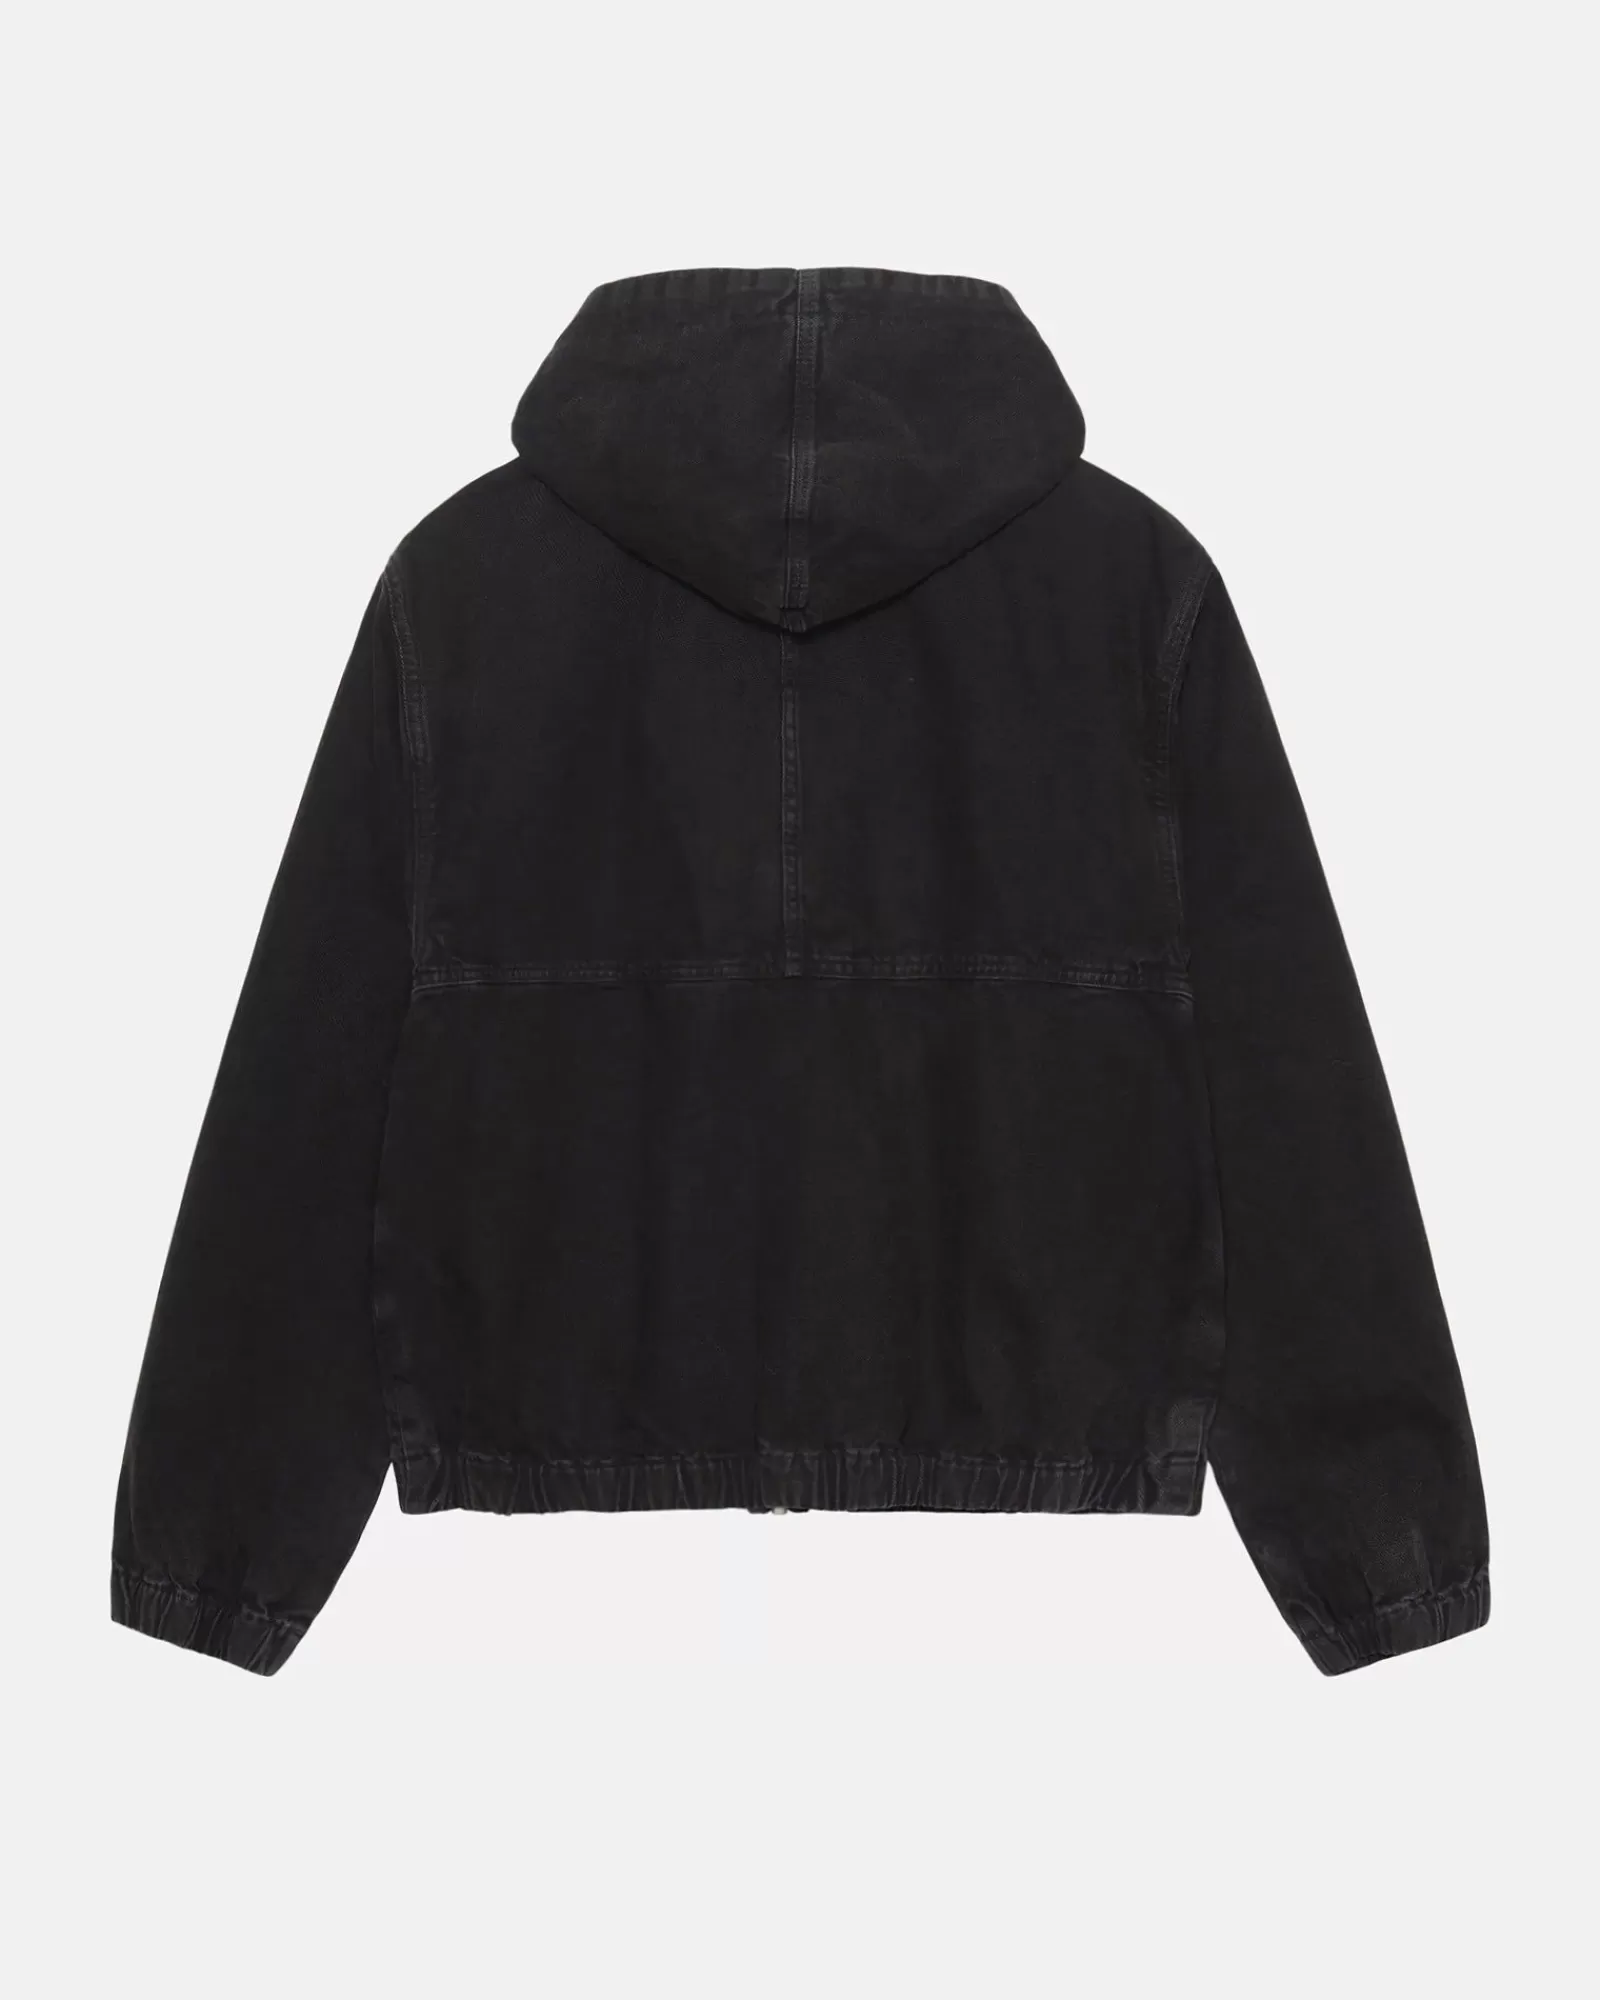 Stüssy Work Jacket Insulated Canvas Outlet